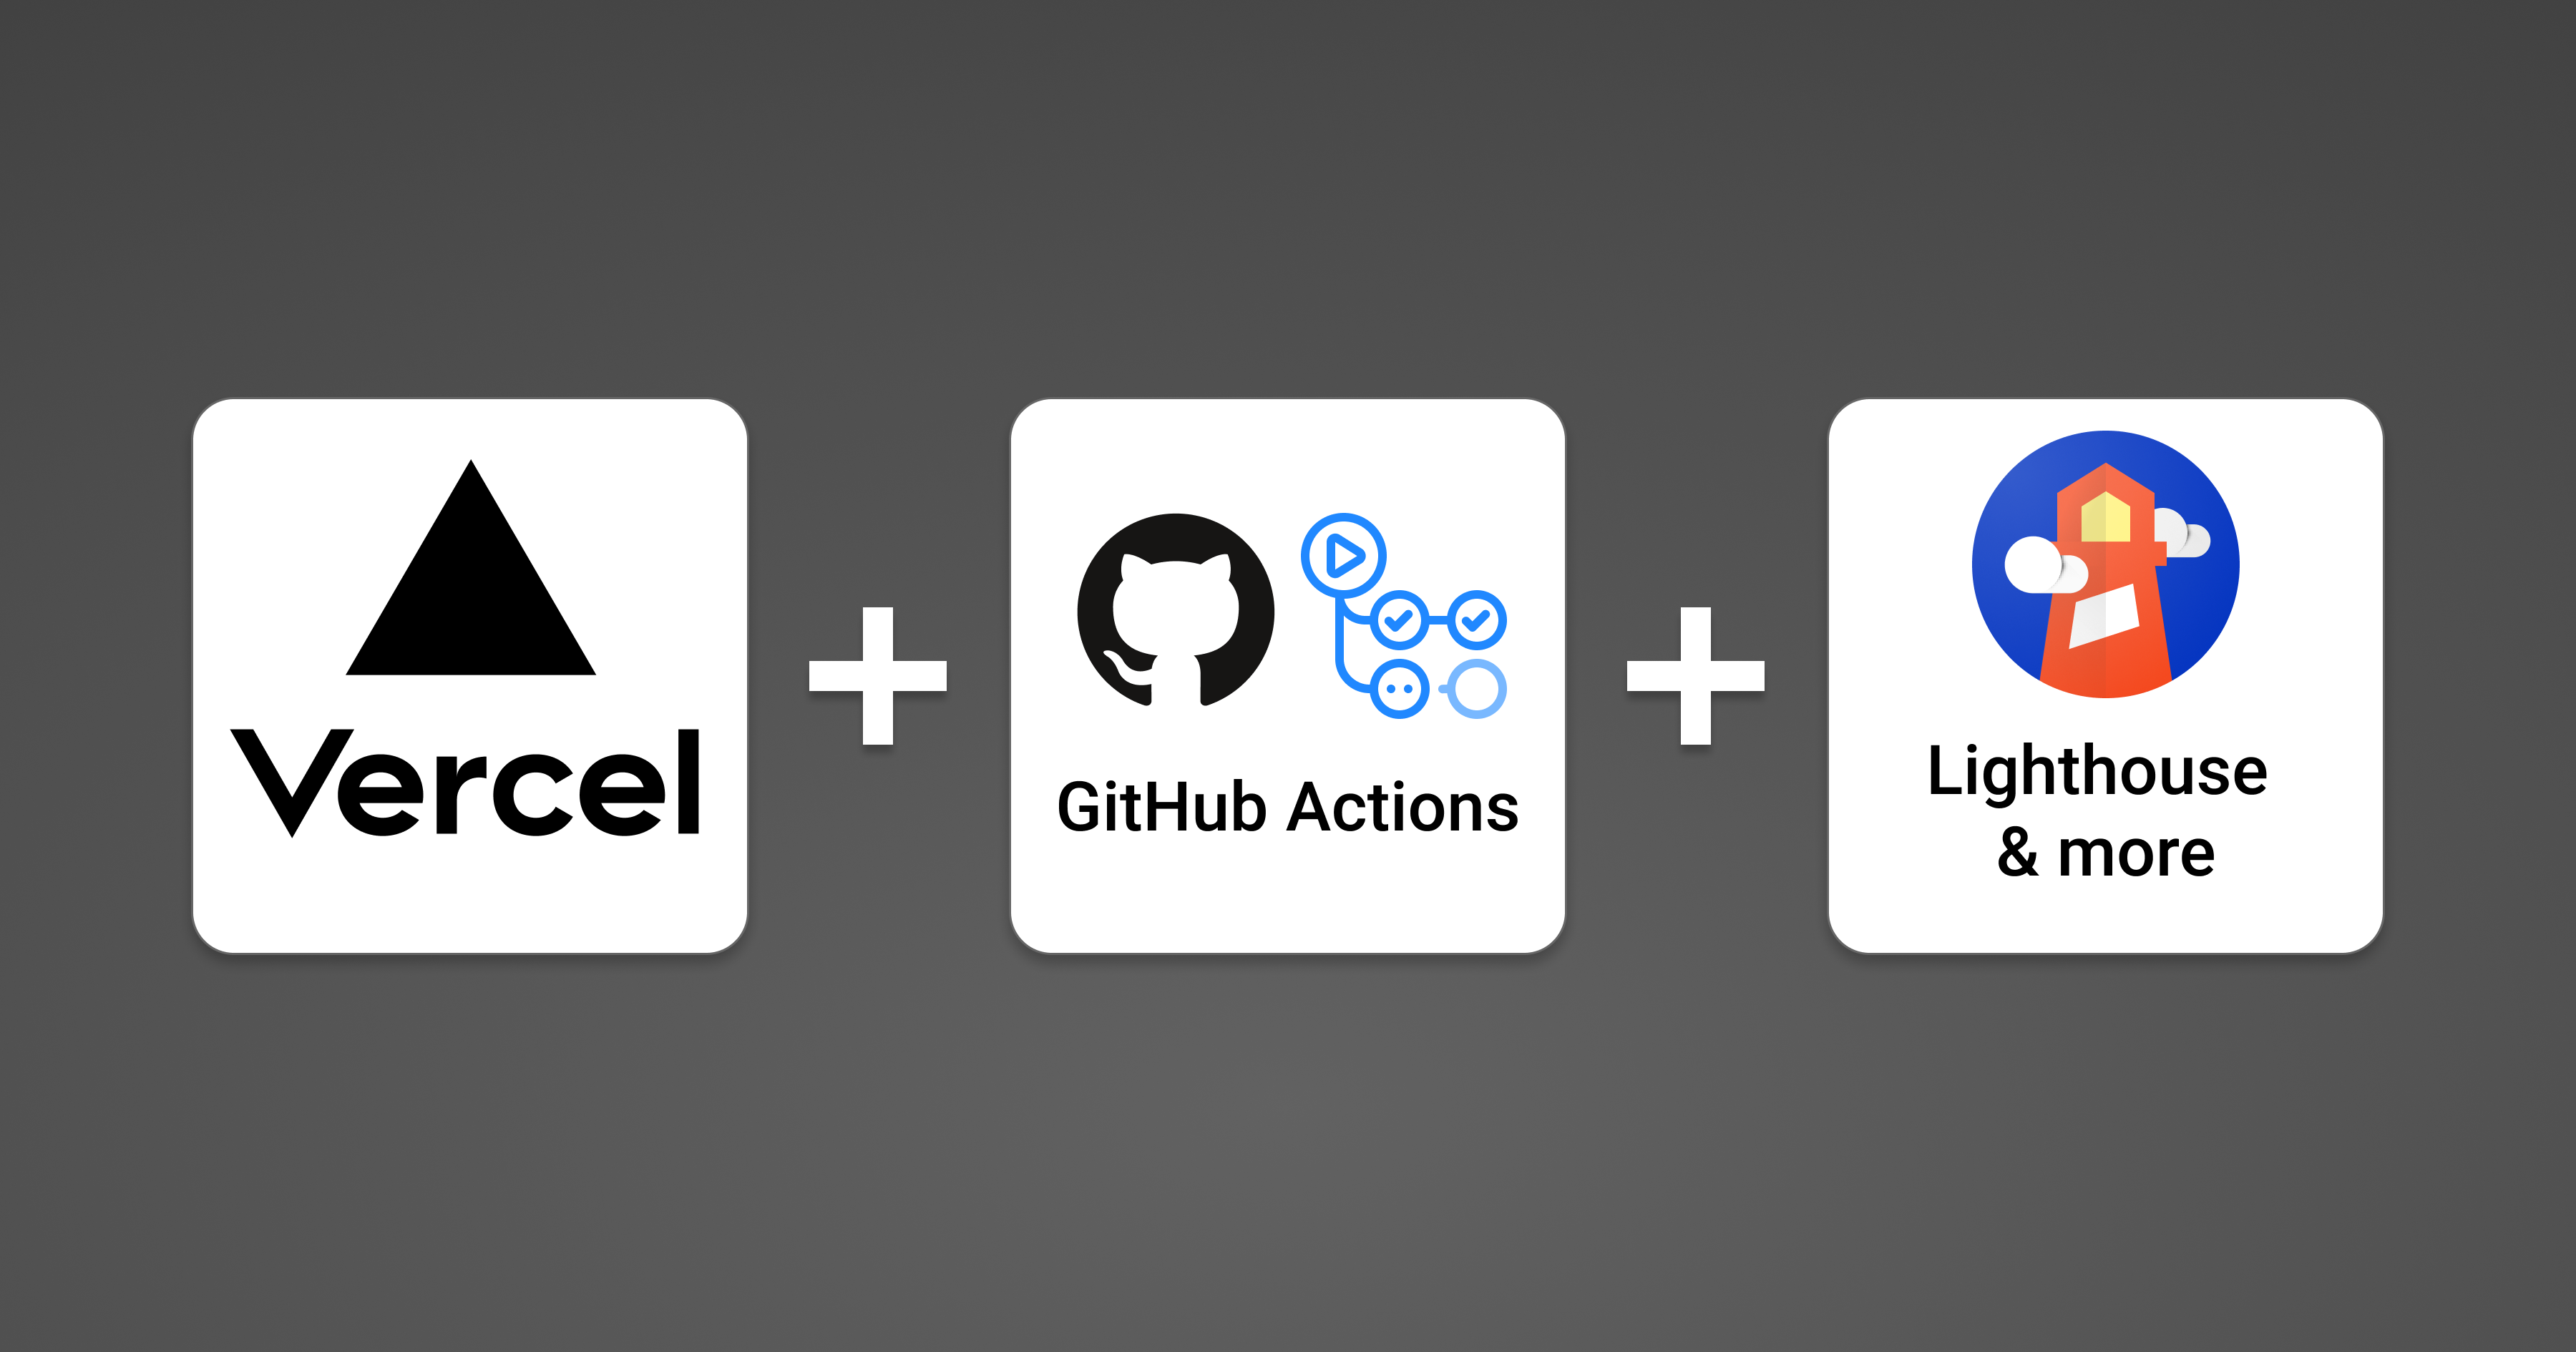 How to use Github Actions on Vercel Preview deployments